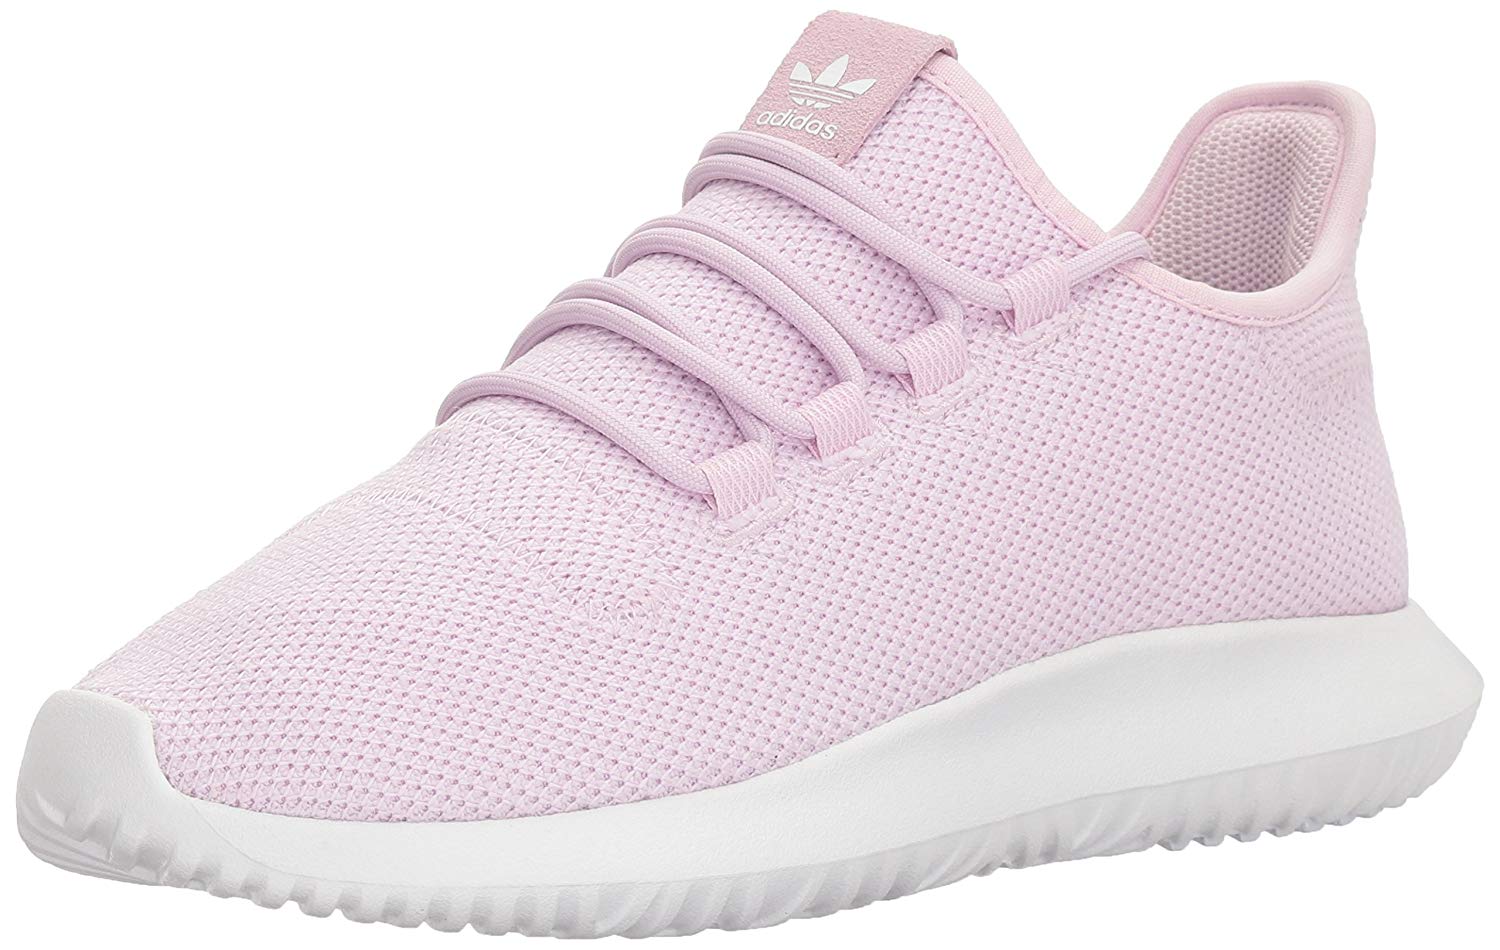 Adidas Children Girls Athletic Shoes in Pink Color, Size 6 RZK ...